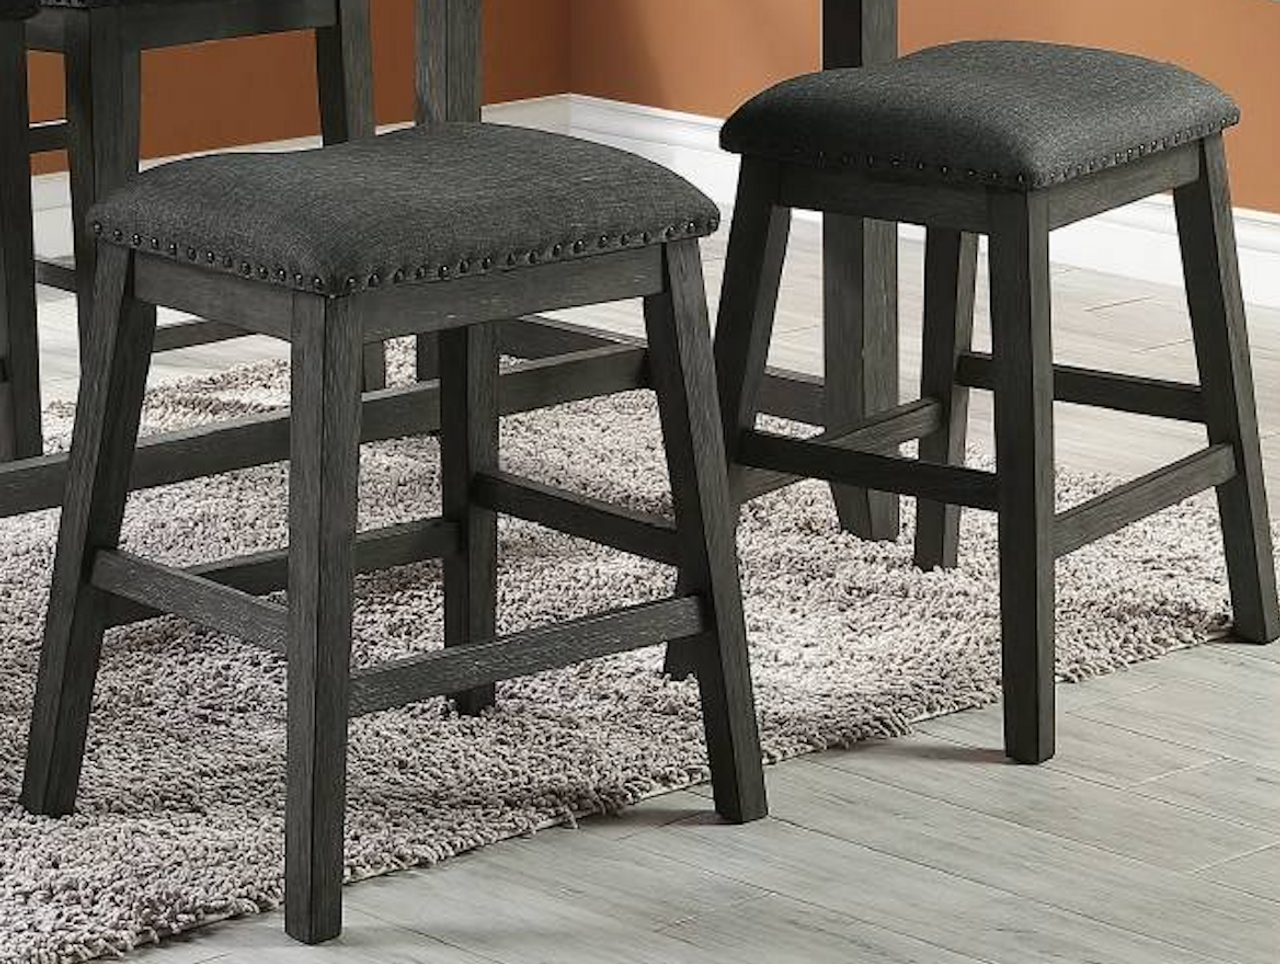 Modern Contemporary Dining Room Furniture Chairs Set of 2 Counter Height High Stools Dark Brown Finish Wooden Foam Cushion Seat